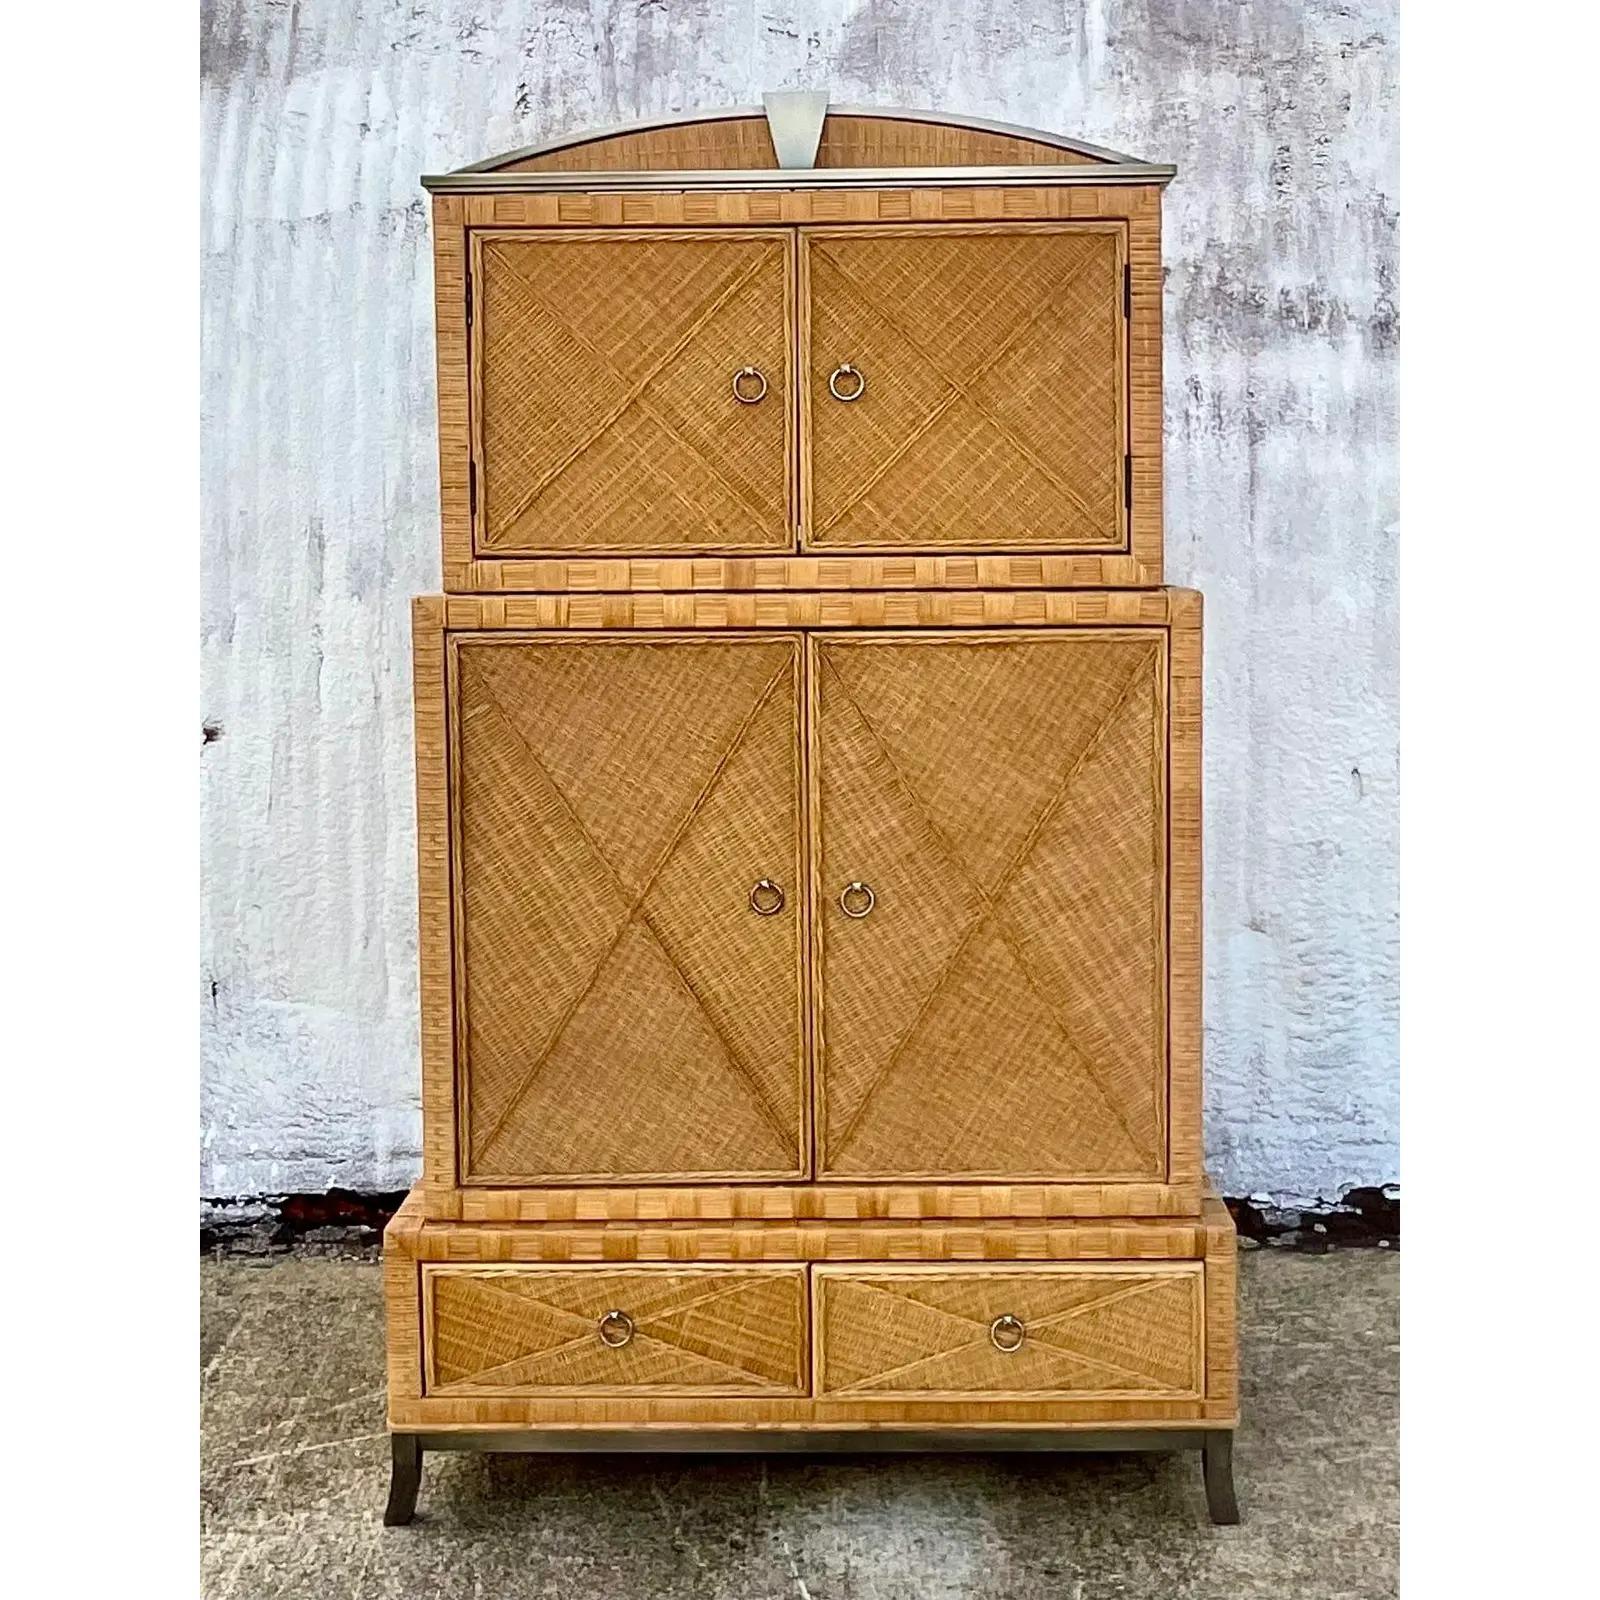 Fantastic vintage Coastal armoire. Beautiful woven rattan cabinet with a chic diamond motif. A stacked design that allows the user to simply stack the three pieces to create this dramatic armoire. Great if you need an armoire and you are challenged